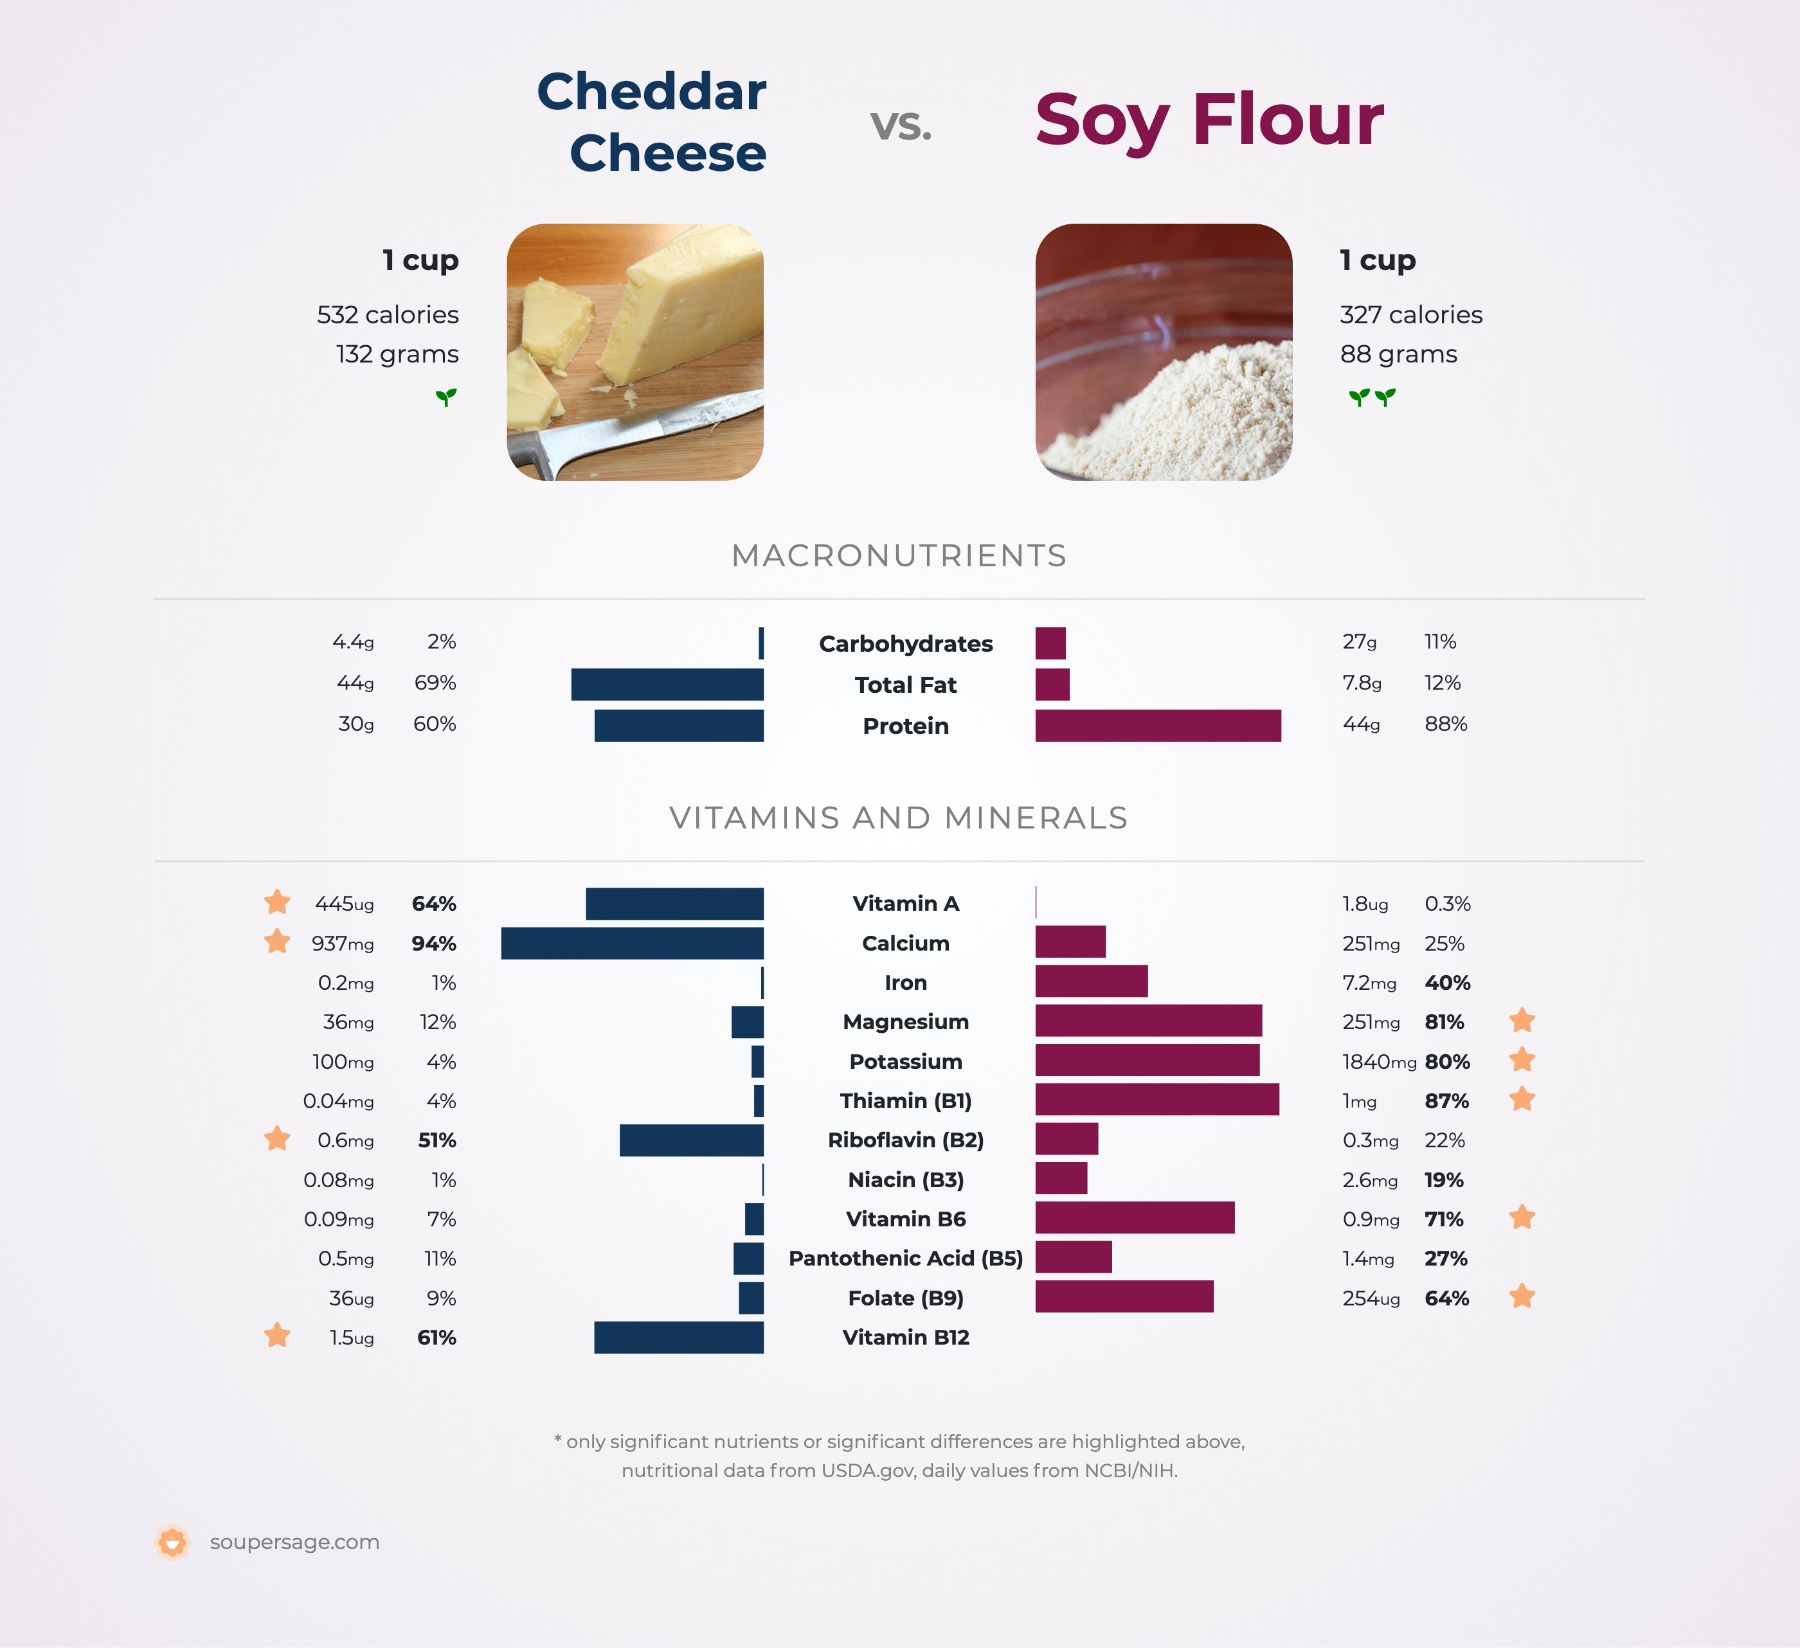 nutrition comparison of cheddar cheese vs. soy flour